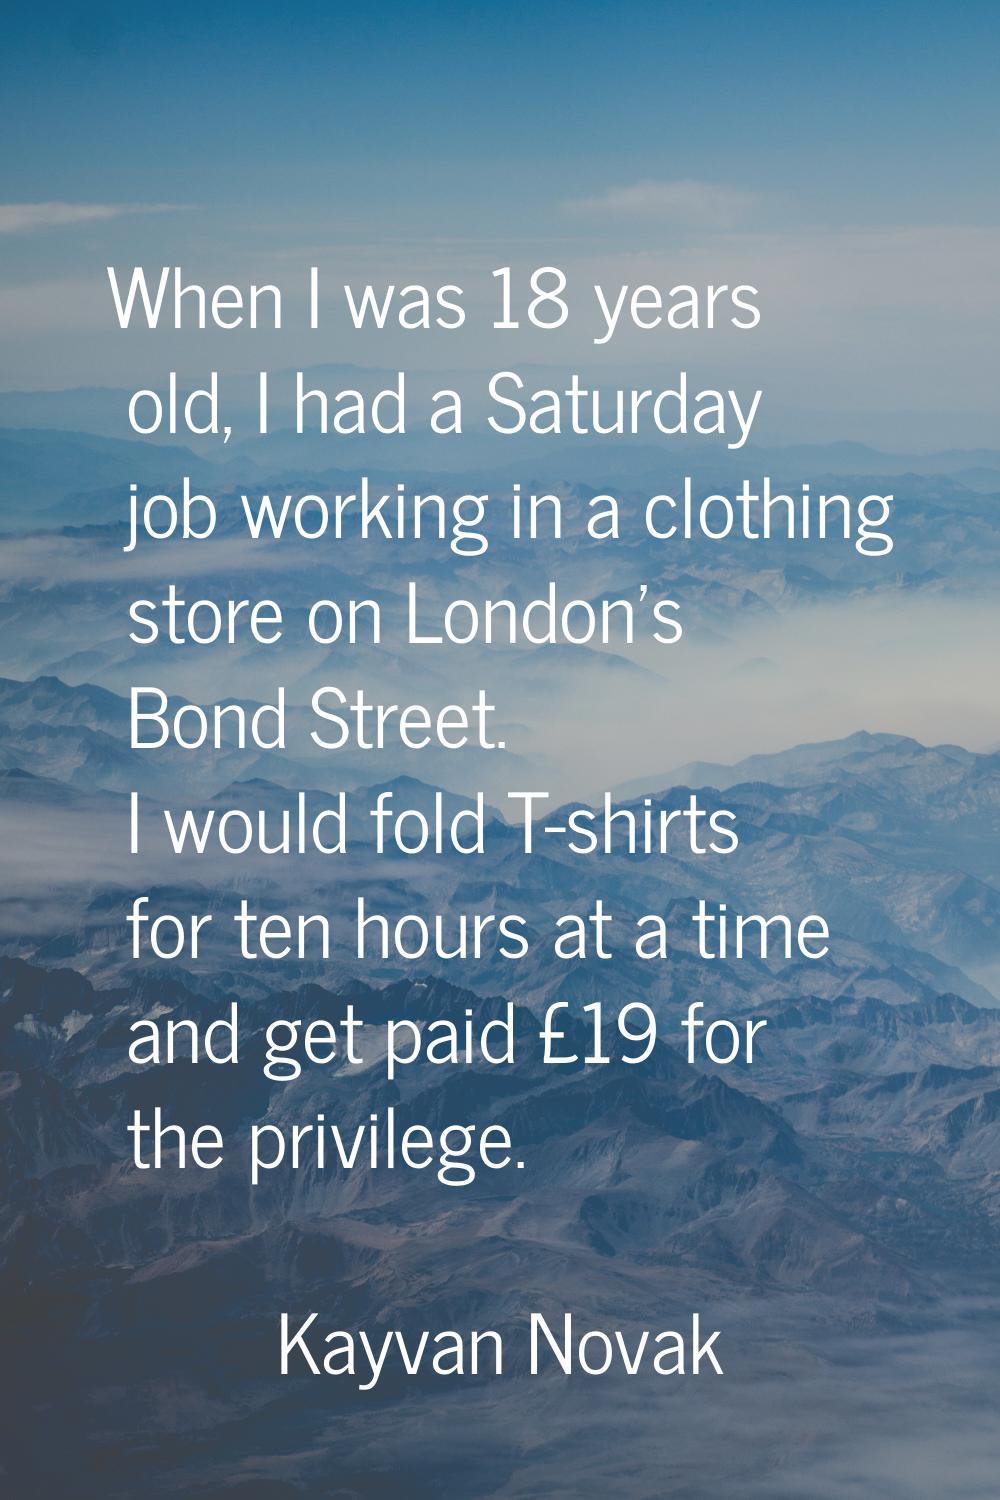 When I was 18 years old, I had a Saturday job working in a clothing store on London's Bond Street. 